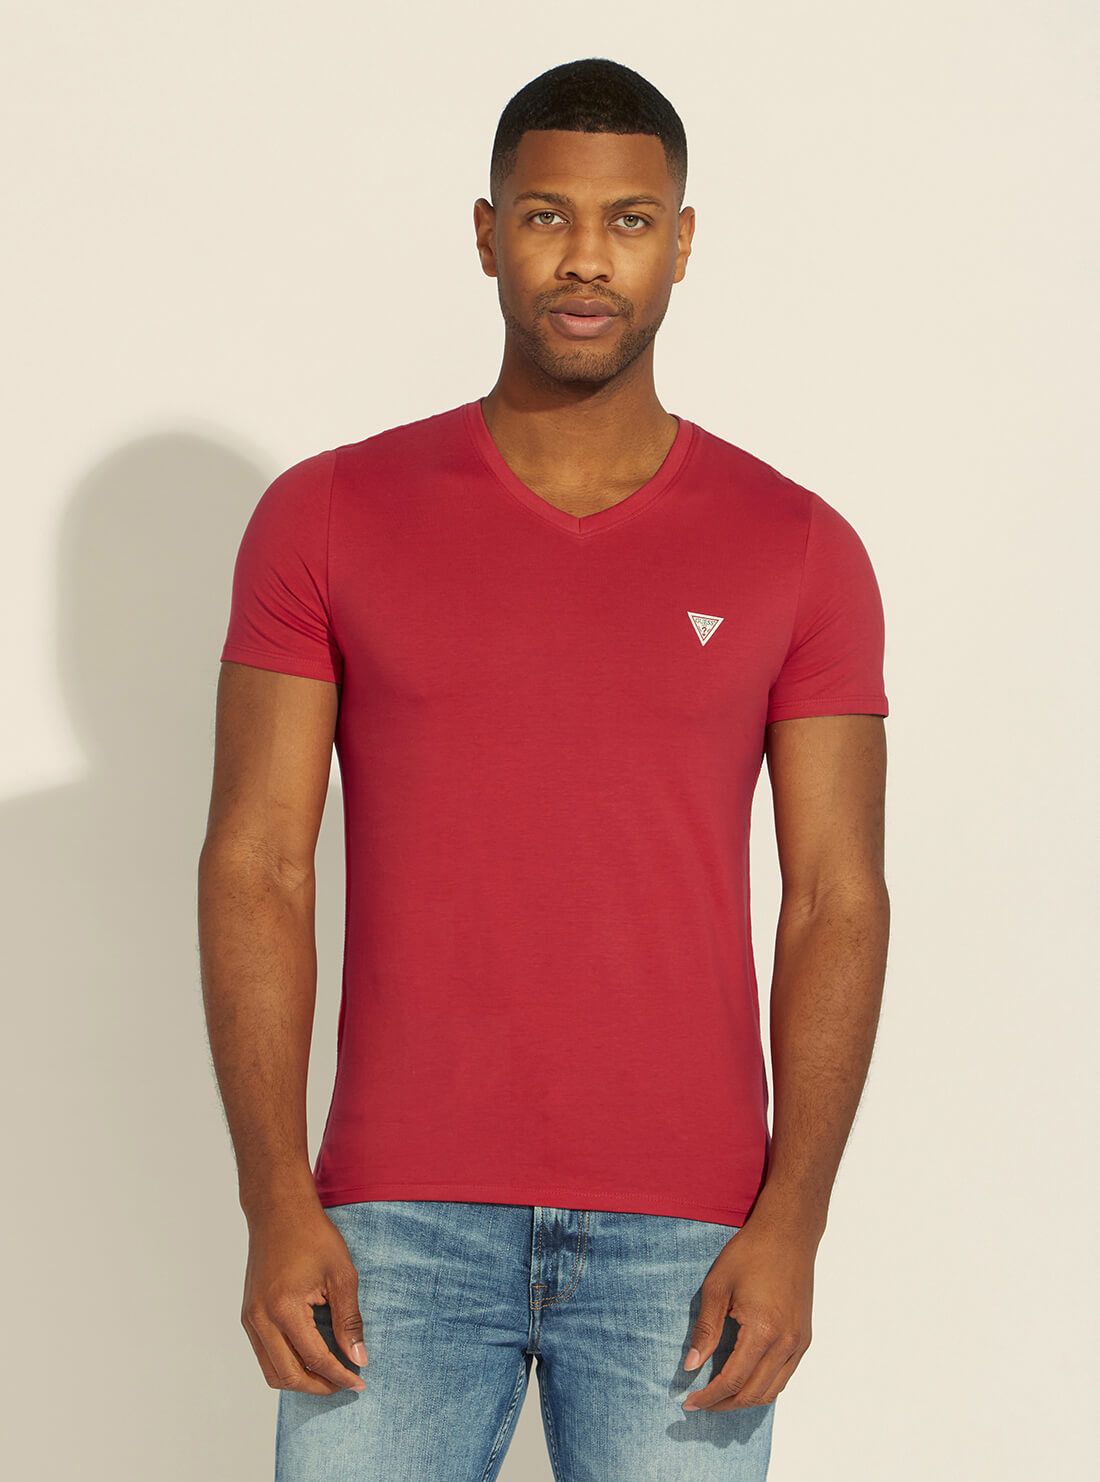 GUESS Mens Eco Red V-Neck Basic T-Shirt M1RI37I3Z11 Front View